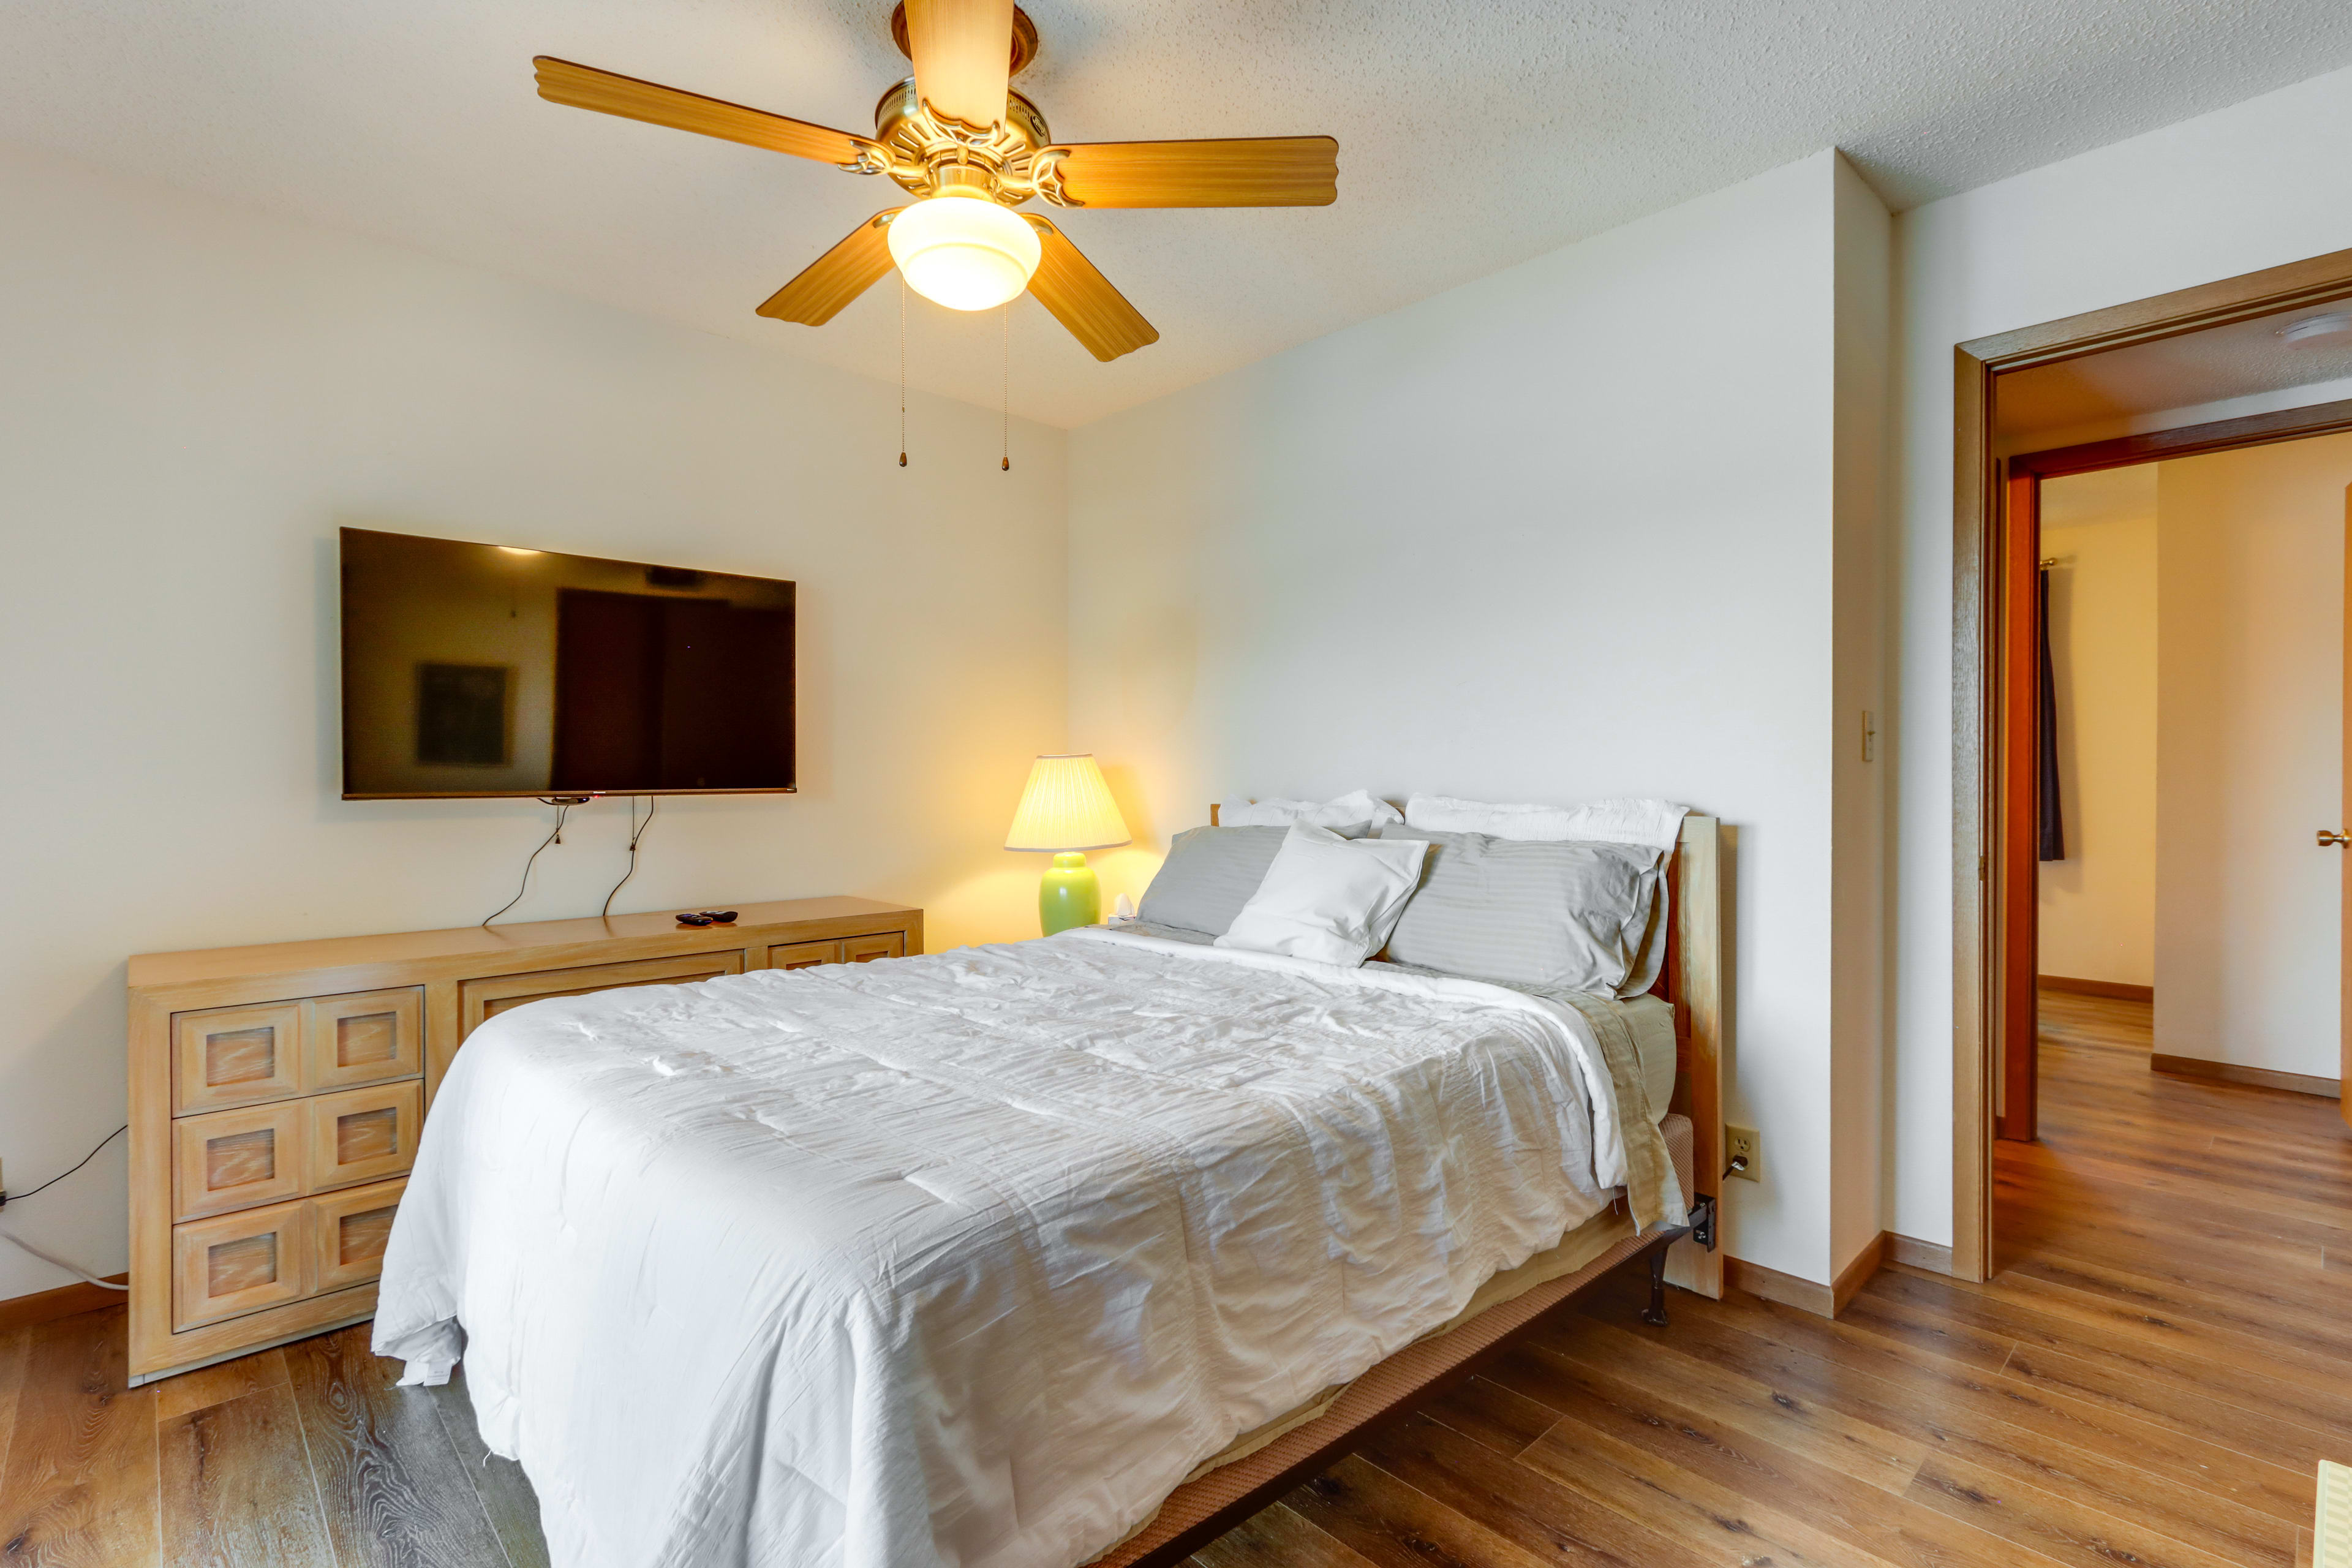 Bedroom 1 | Queen Bed | Access to Balcony | Central Air Conditioning/Heat